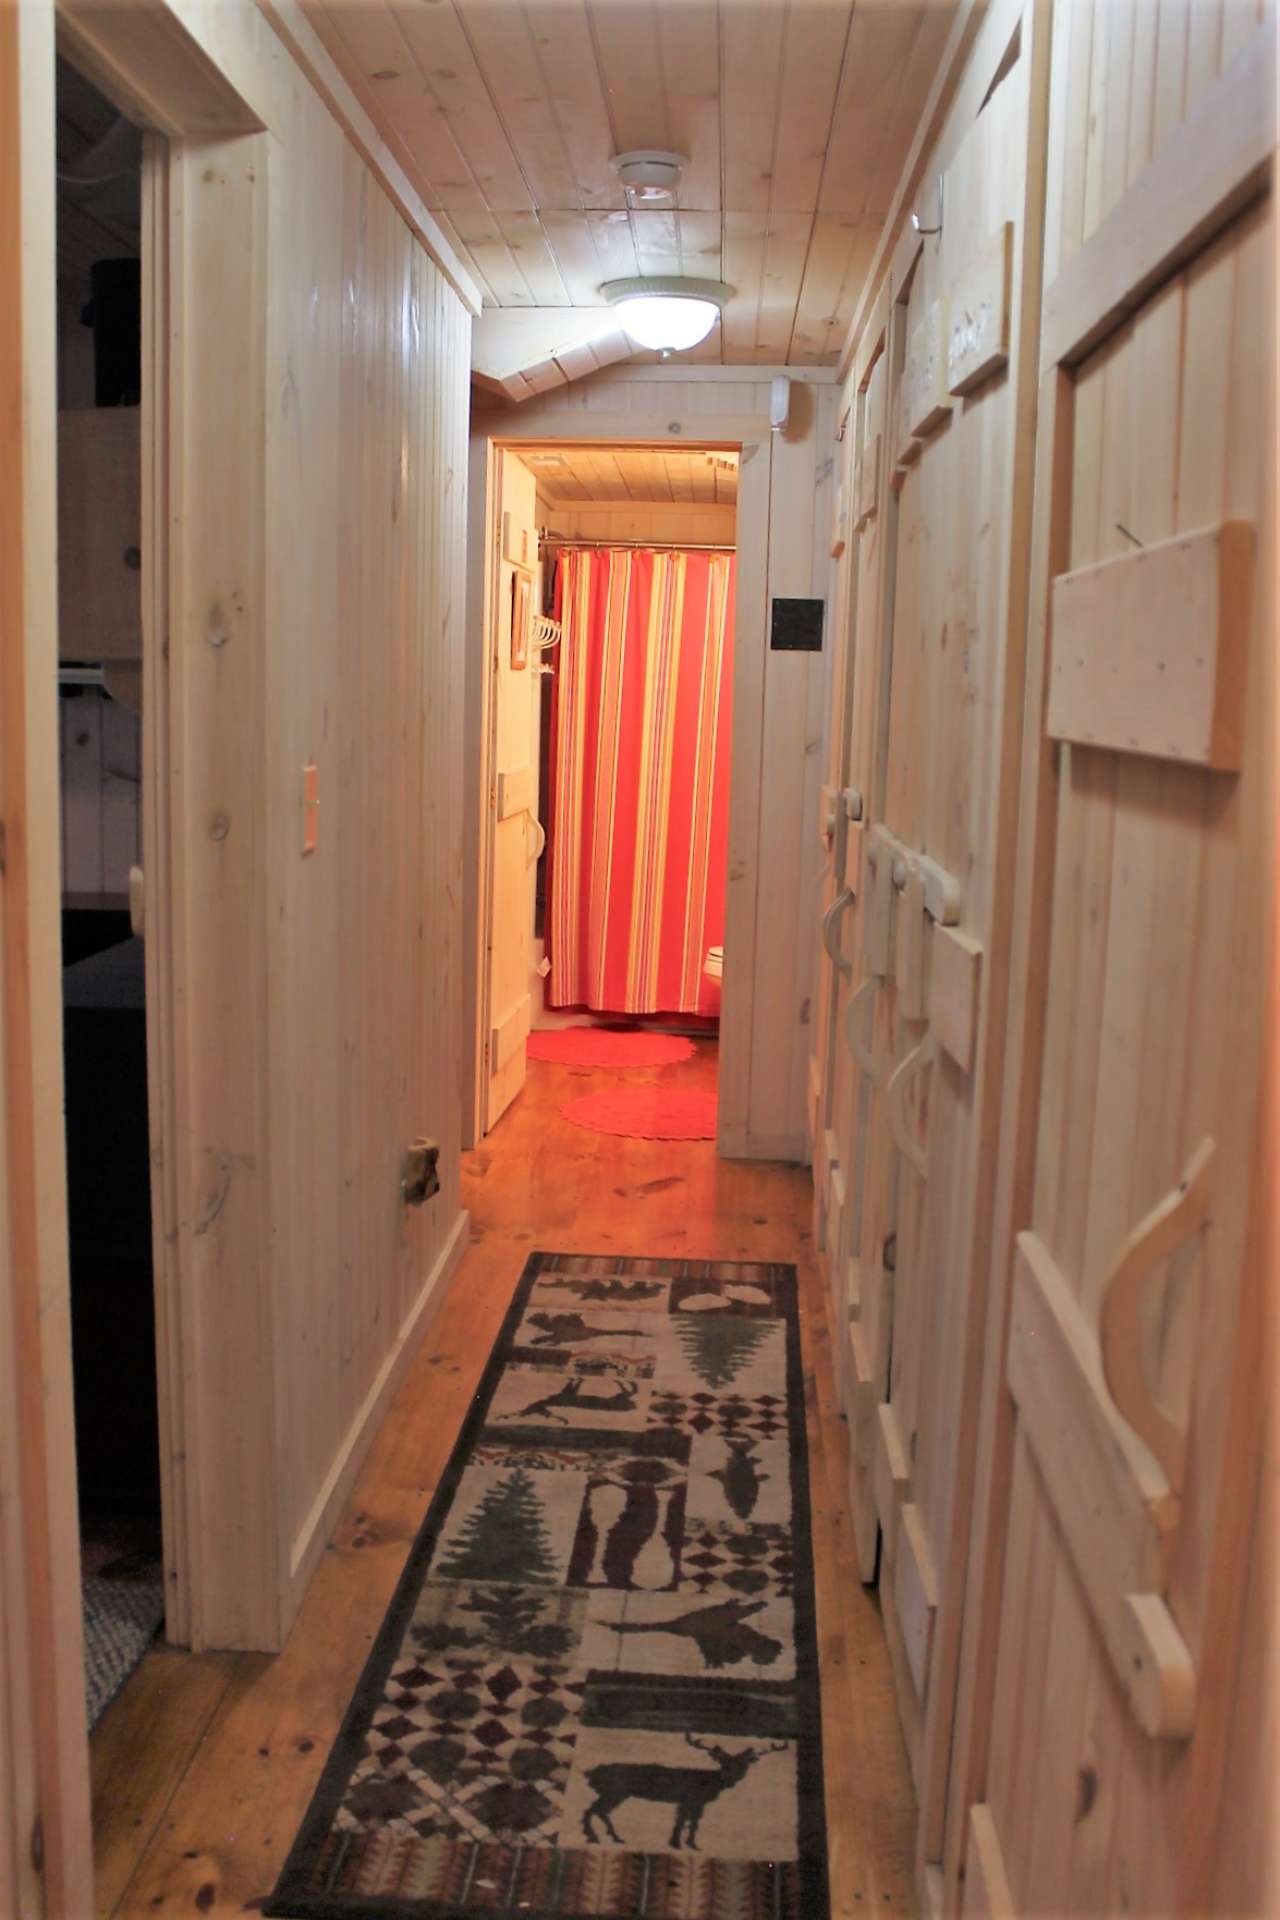 Lower level hallway has a wall of multiple closets providing abundant storage as well as a full size washer and dryer.